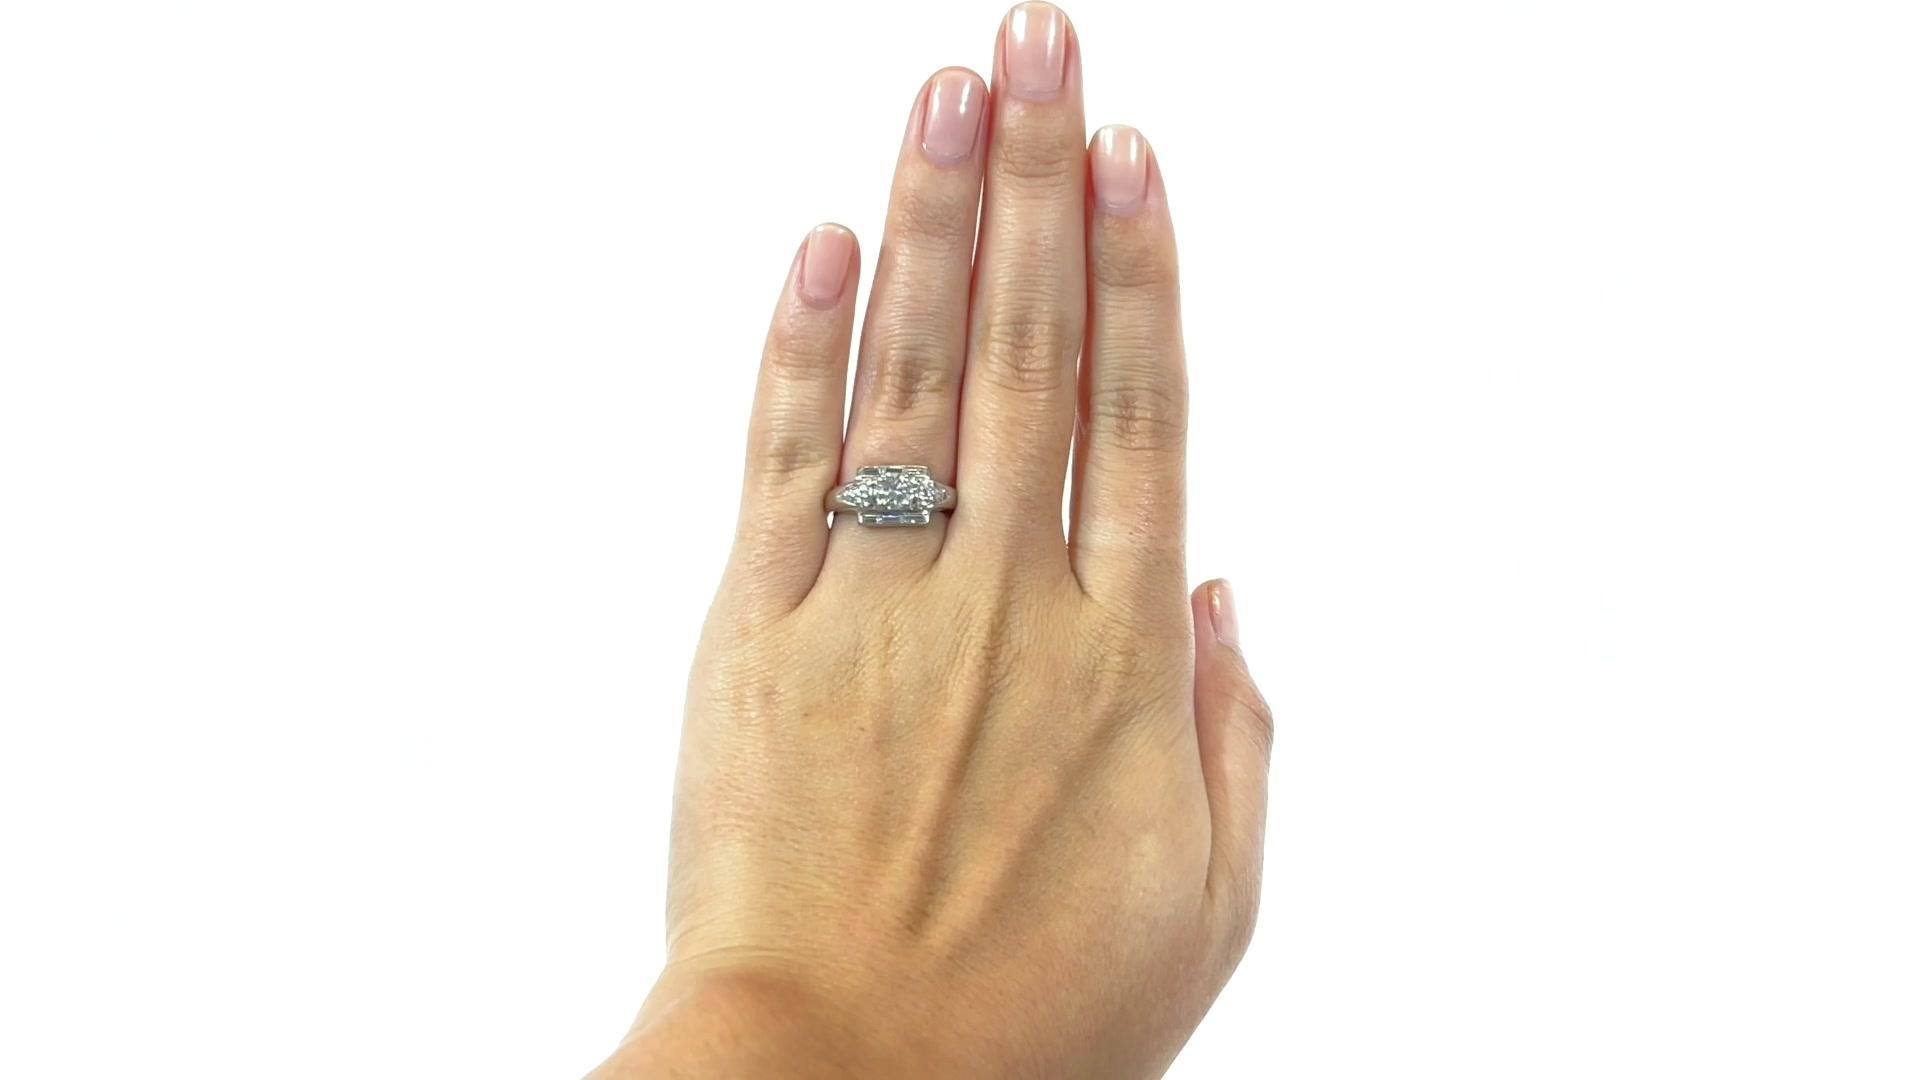 Retro Diamond Platinum Engagement Ring. Featuring a transitional cut diamond approximately 0.55 carat, F-G color, VS clarity. Accented by 12 Round Brilliant Cuts, approximately 0.12 carat, and 6 baguettes approximately 0.32 carat, G-H color, VS.